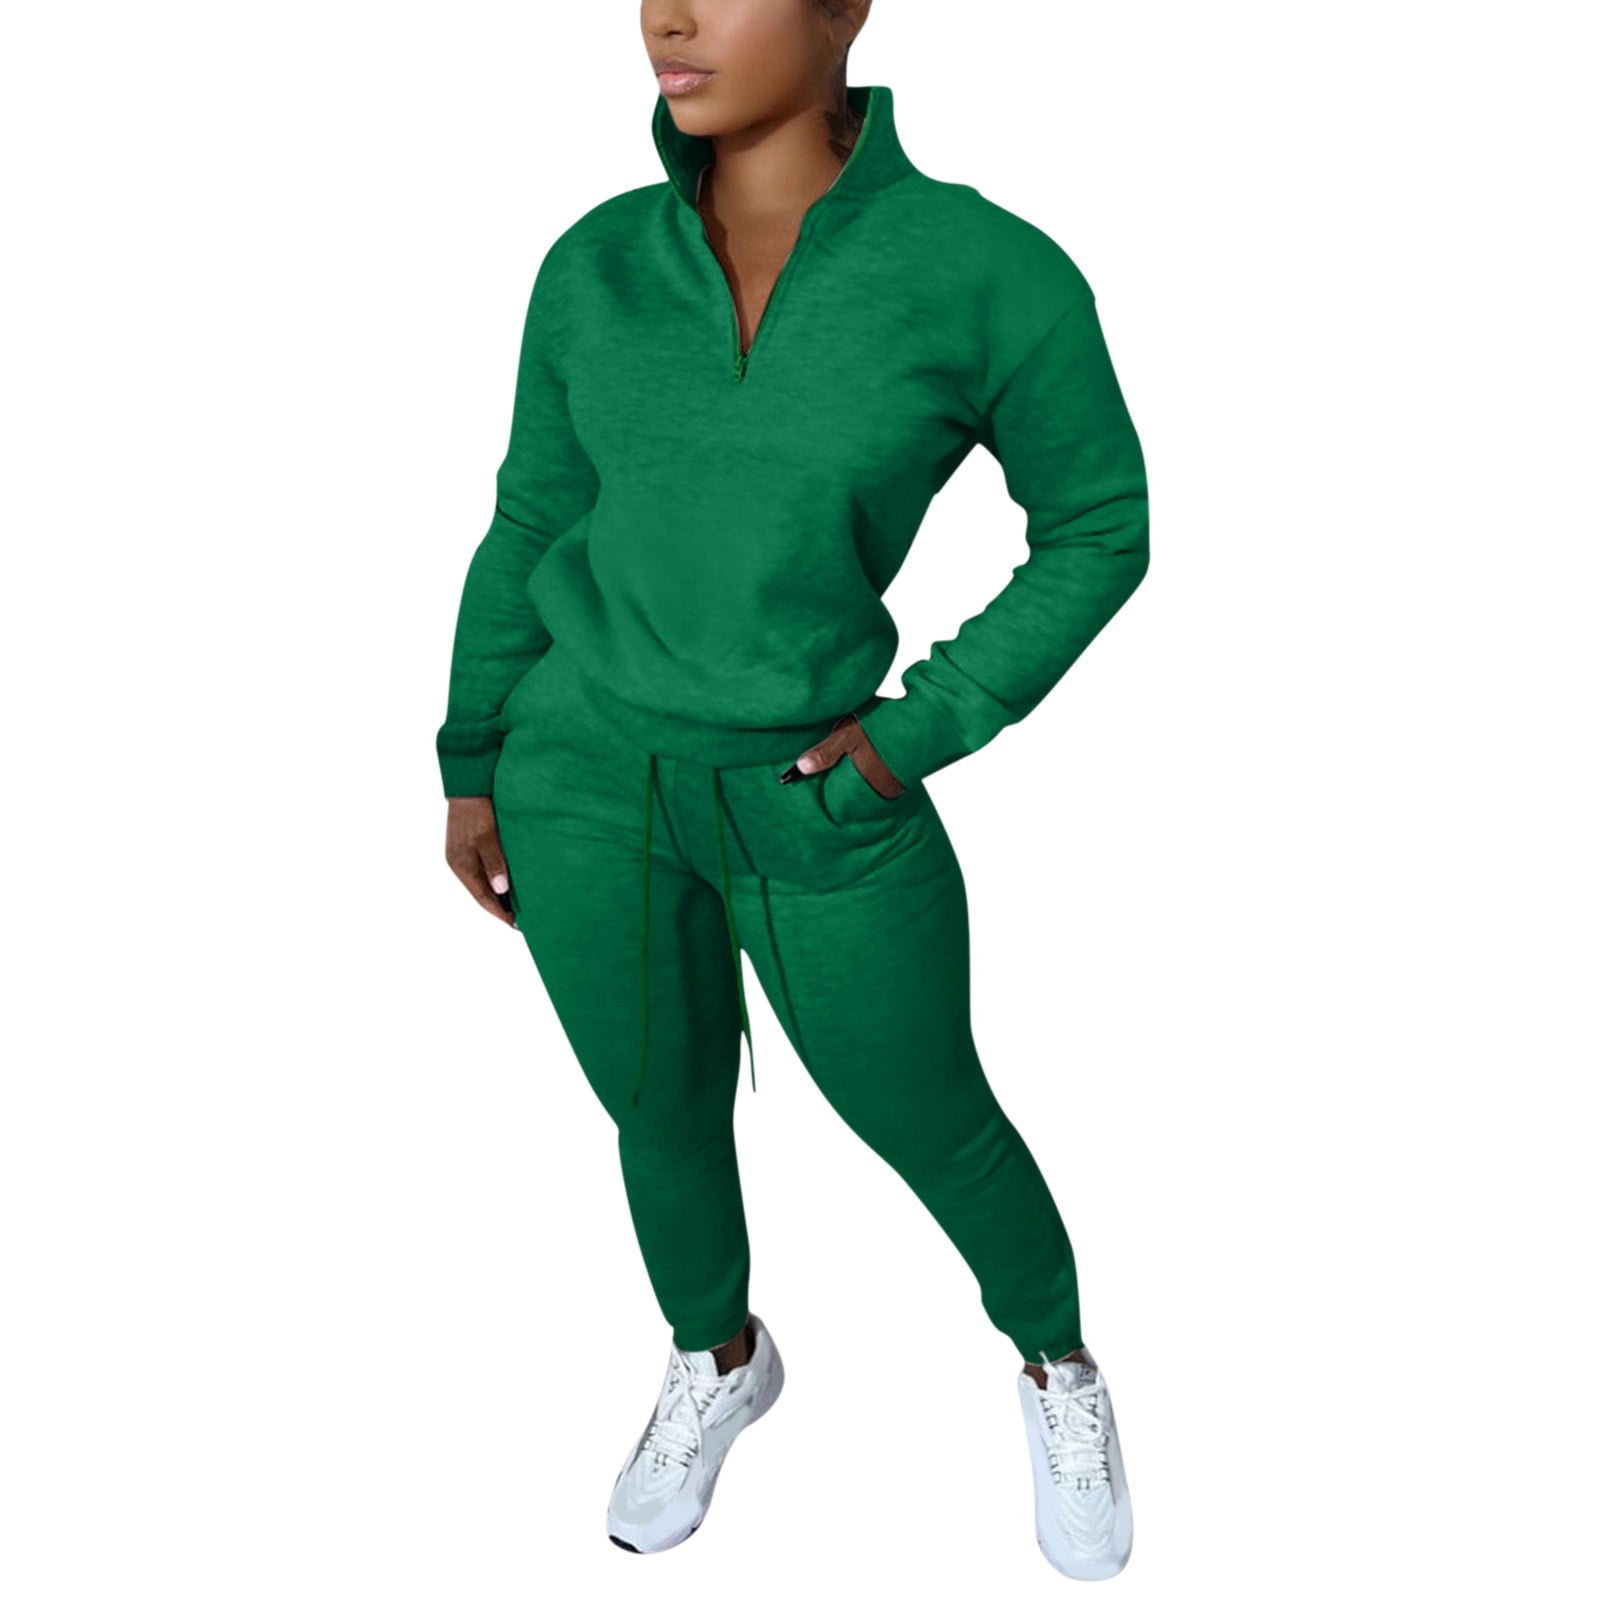 Aunavey Womens Jogging Suits Sets Running Outfit Zipper Warm Up 2 Pieces  Hoodie and Pant Tracksuit 